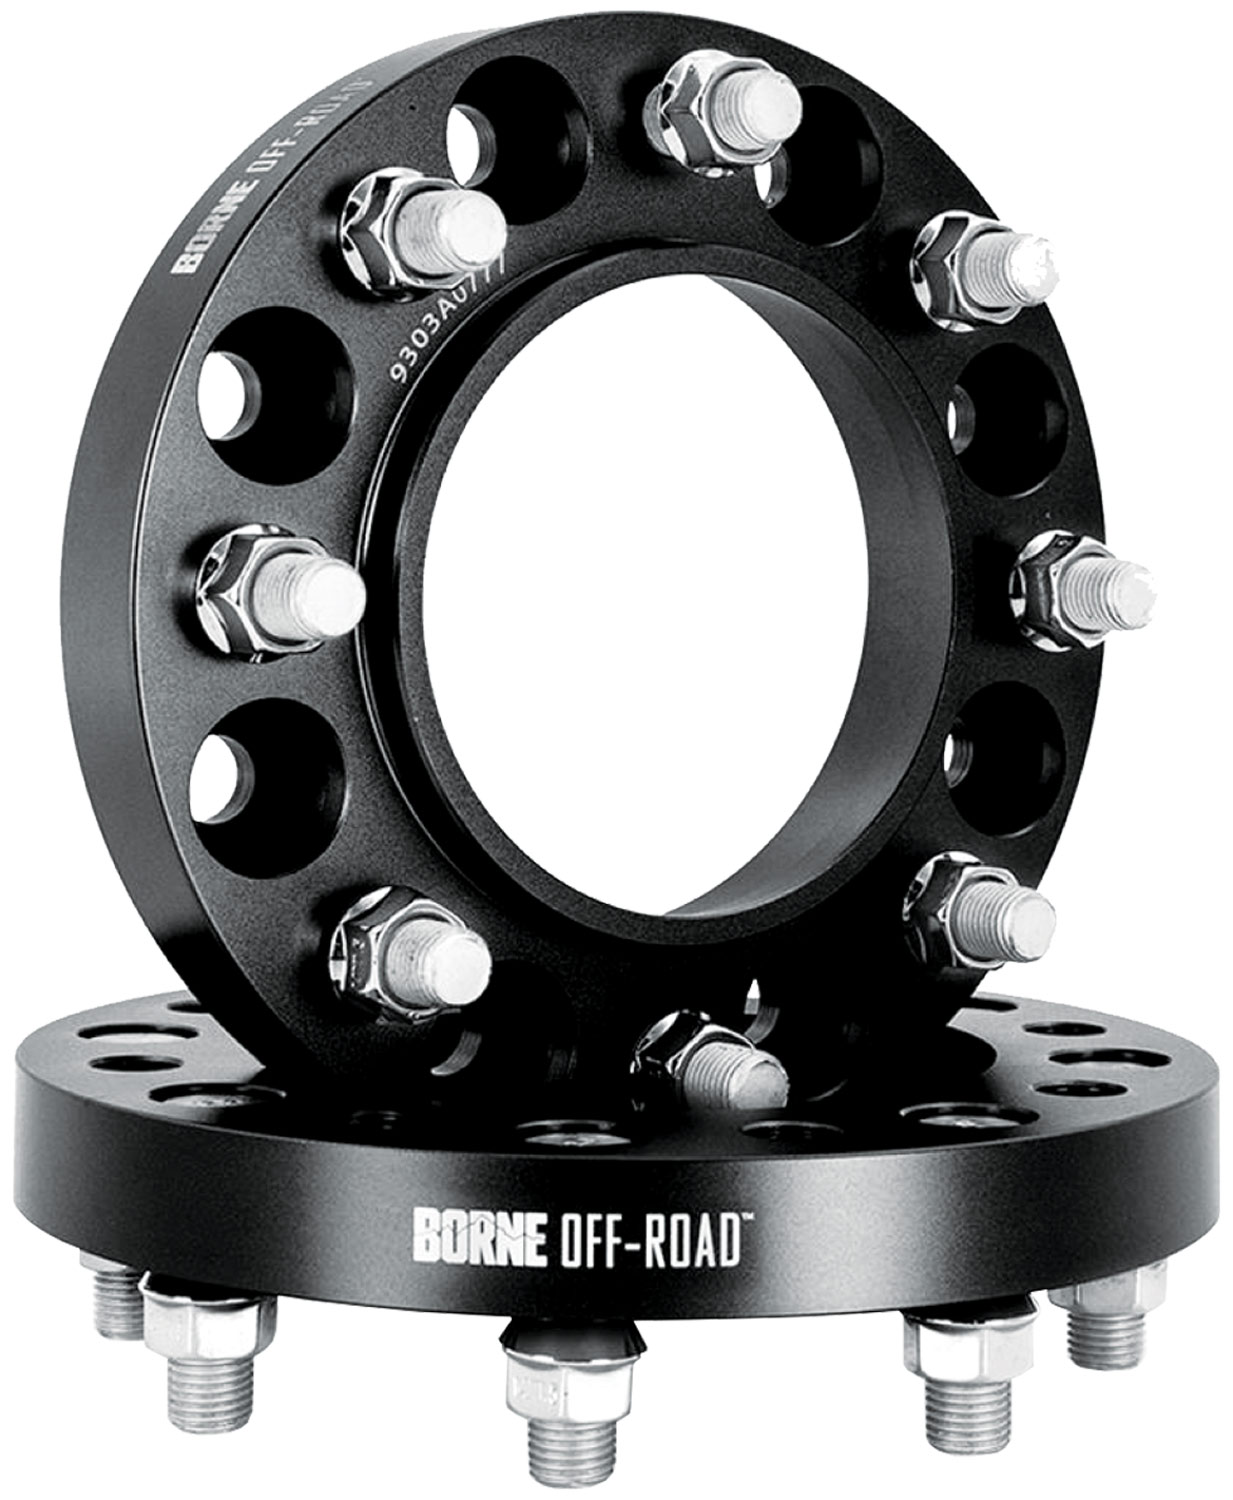 Borne Off-Road by Mishimoto Wheel Spacers